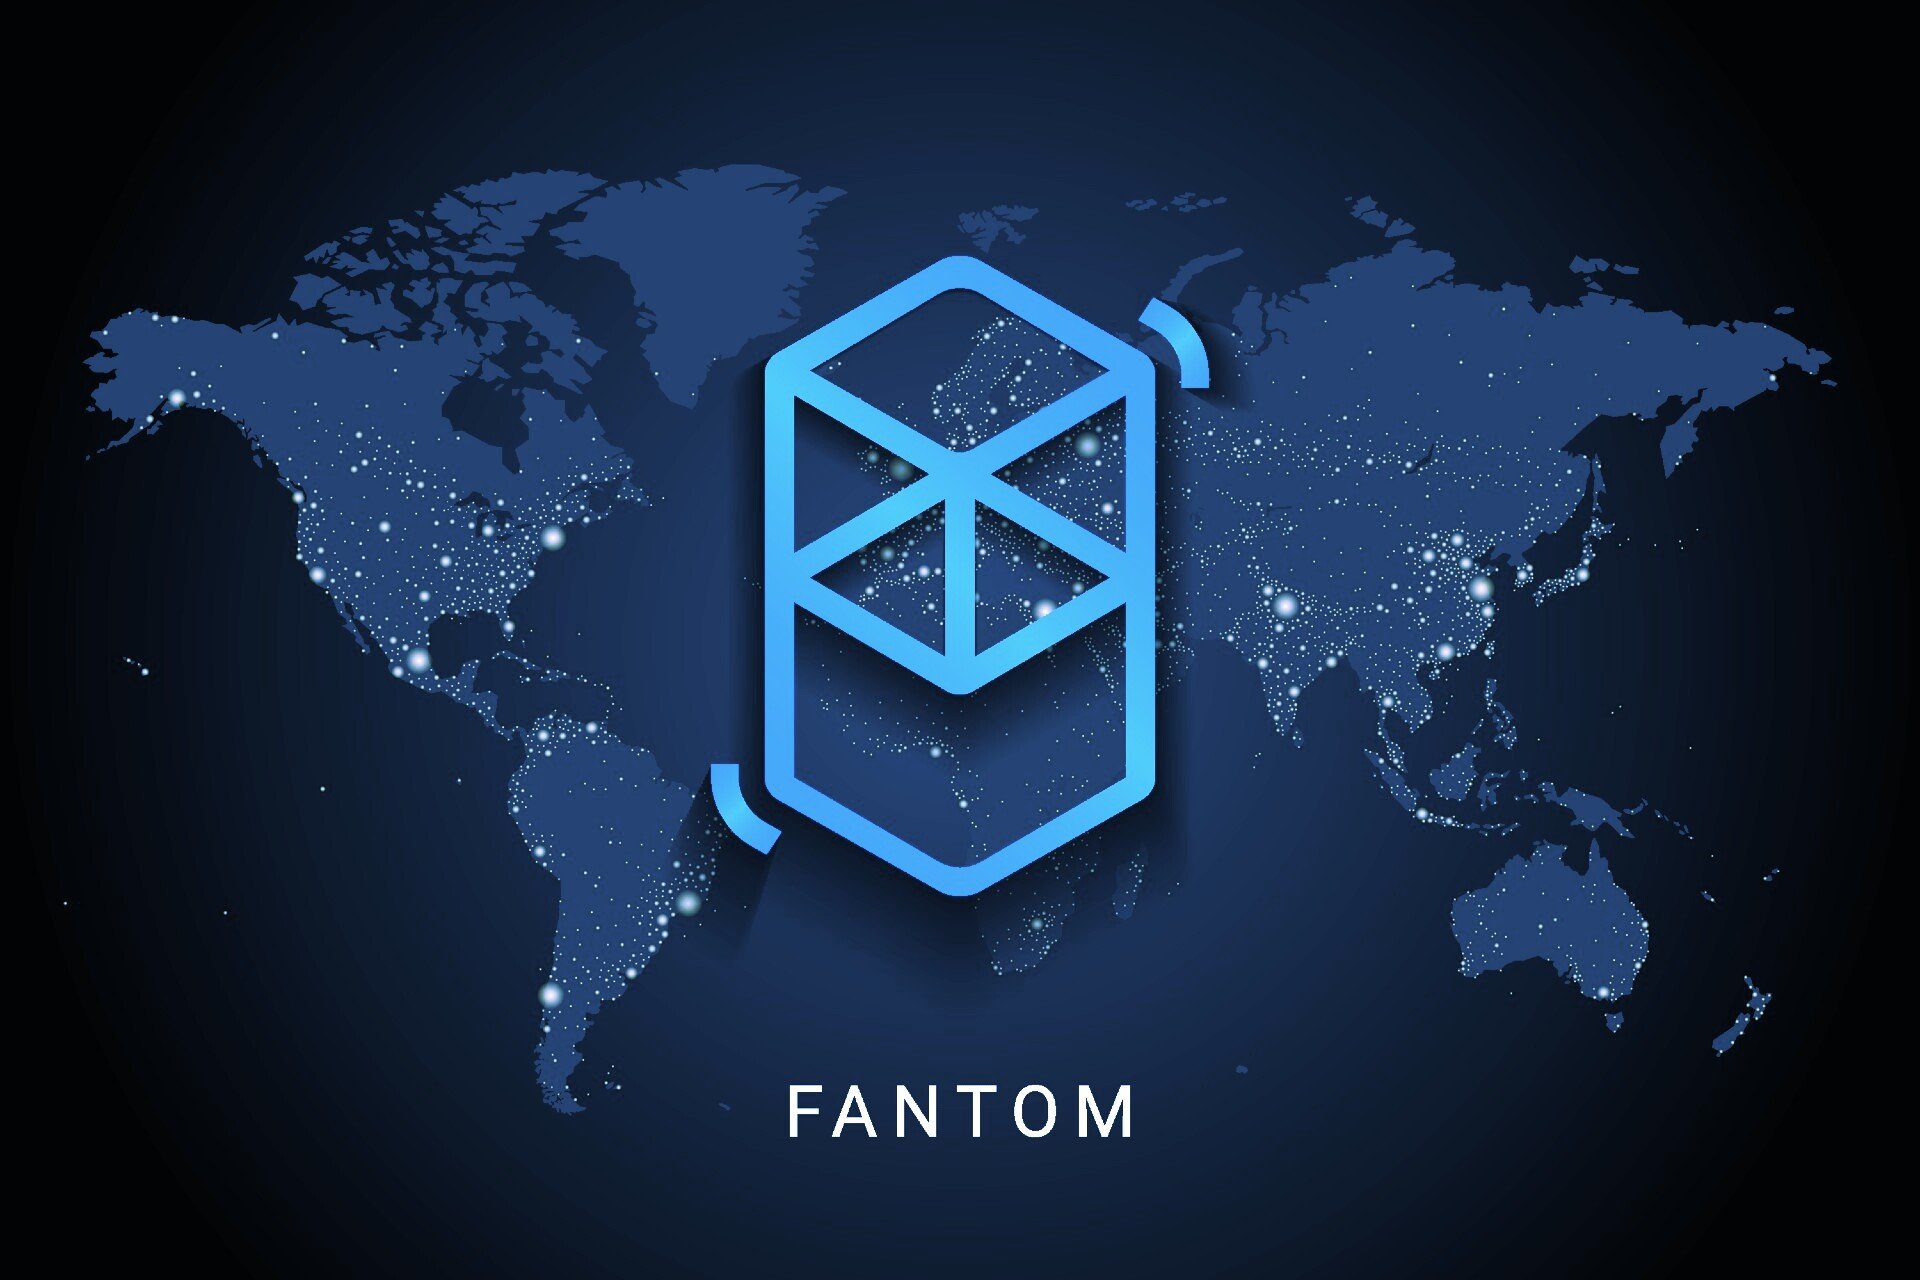 Fantom Rallies 10% as Rest of Market Stays Quiet Ahead of Bitcoin ETF Launch